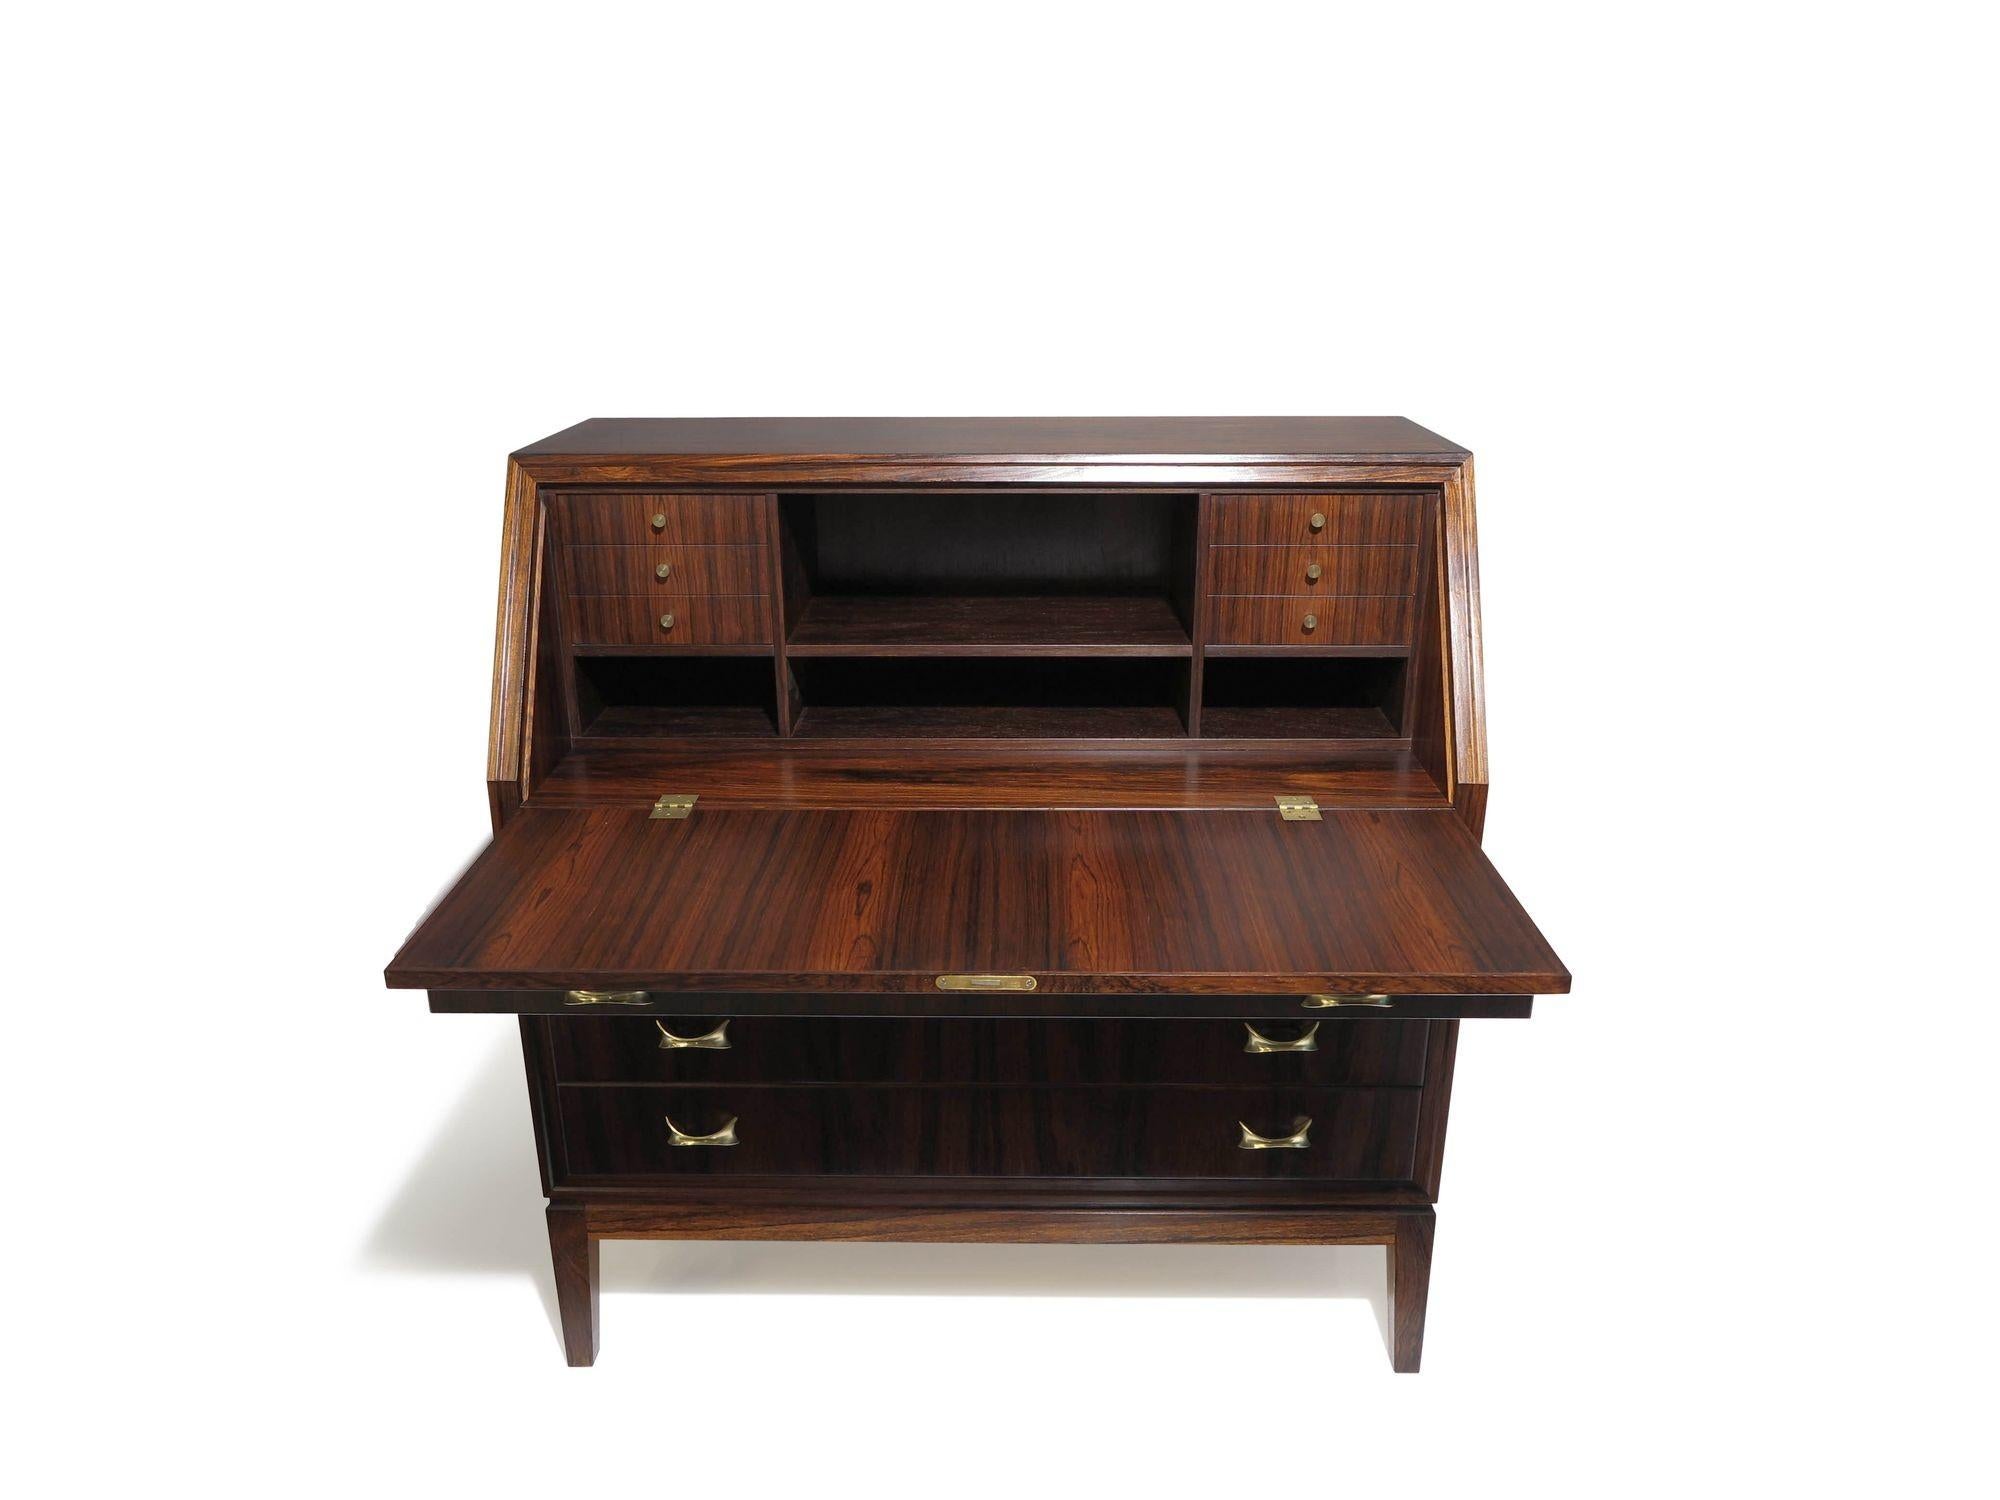 High-quality Brazilian rosewood secretary desk, 1955, Denmark. The secretary desk is finely crafted of stunning Brazilian Rosewood with dark grains and dynamic book-matched patterns across the front of drawers and sides. The secretary features four